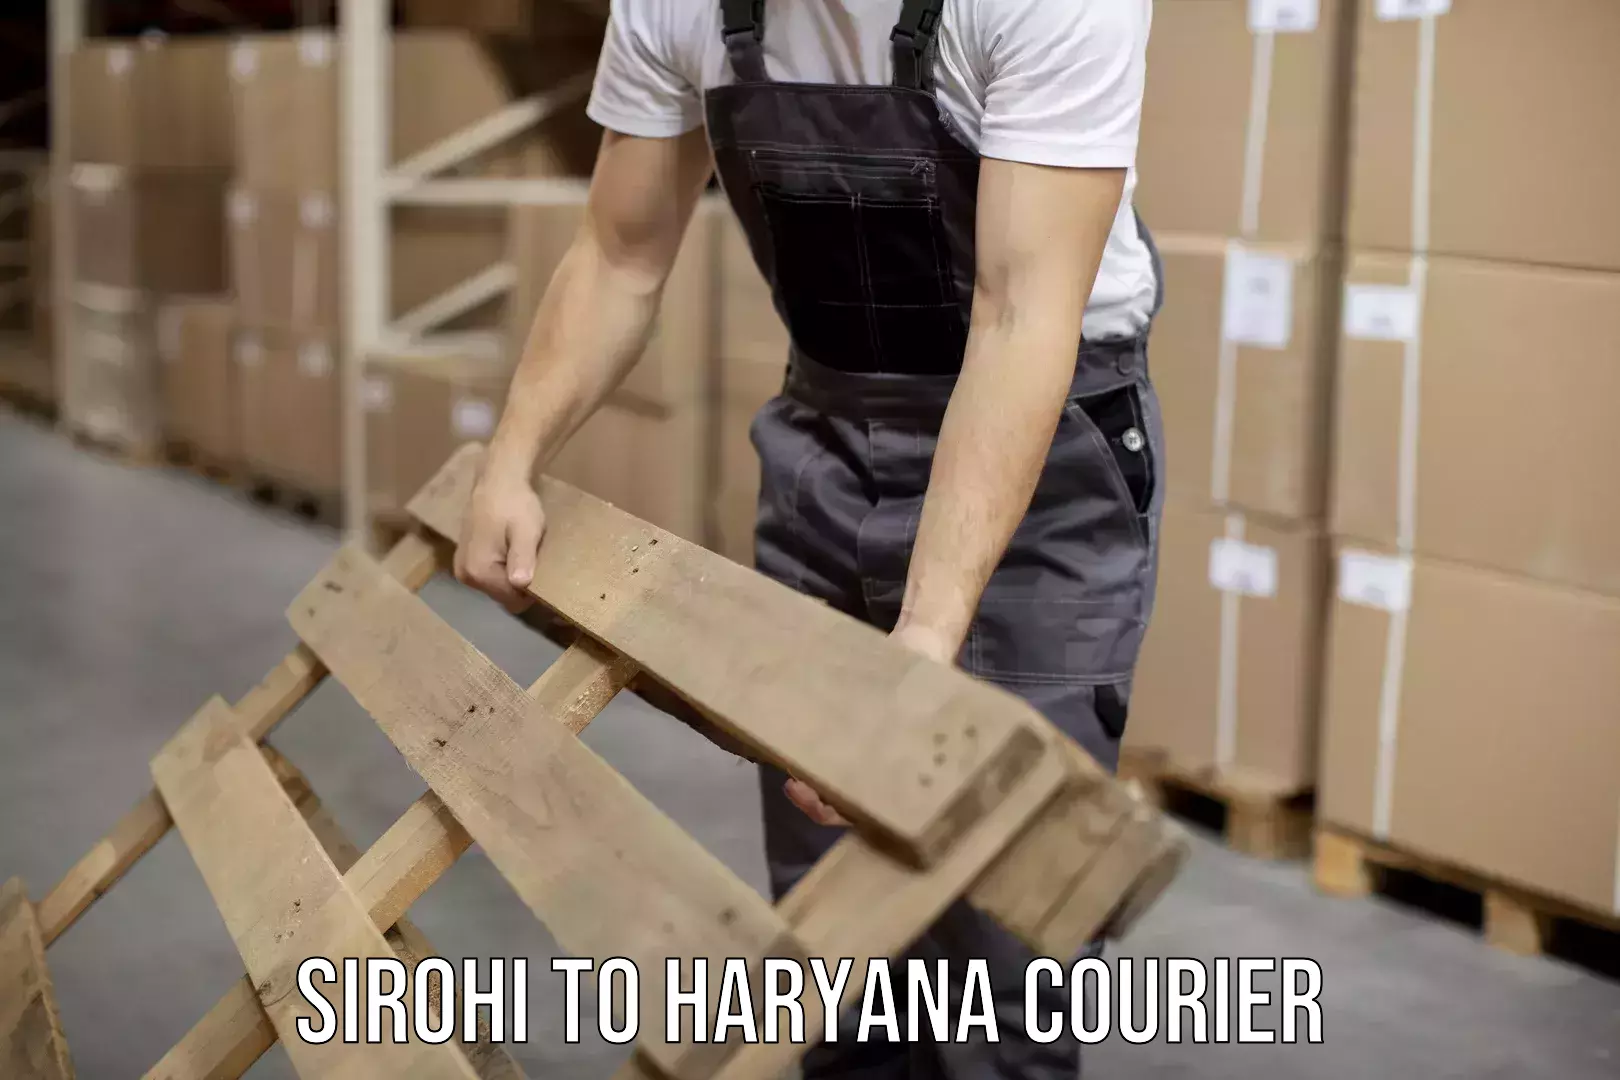 Courier rate comparison Sirohi to Bilaspur Haryana